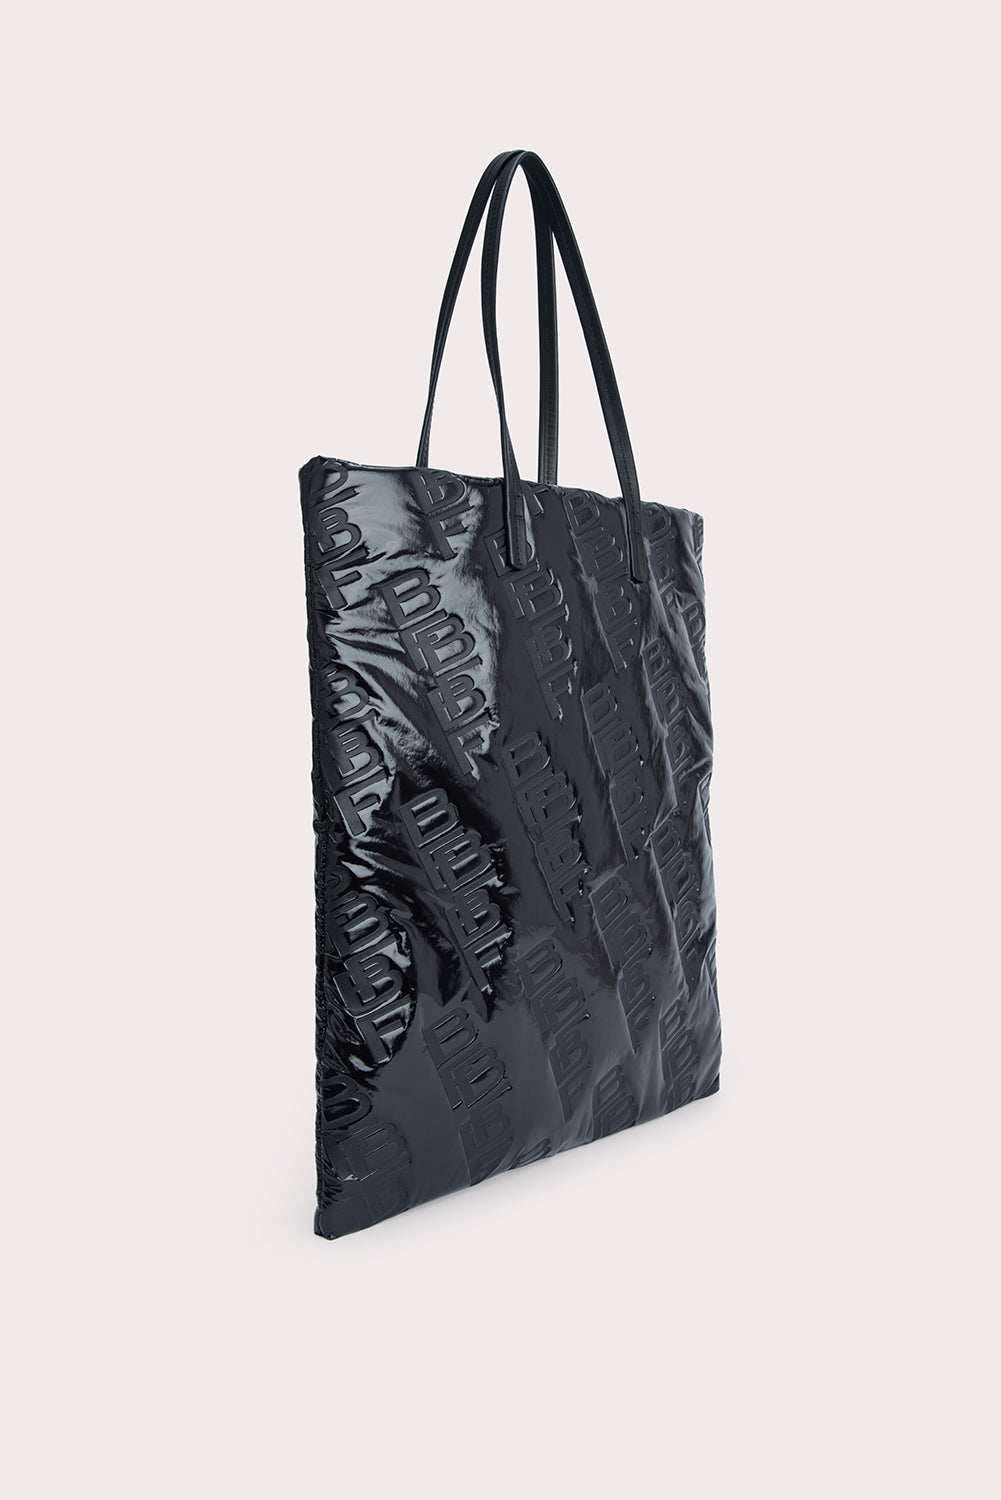 Slim Tote Black Embossed Shellsuit Fabric and Leather